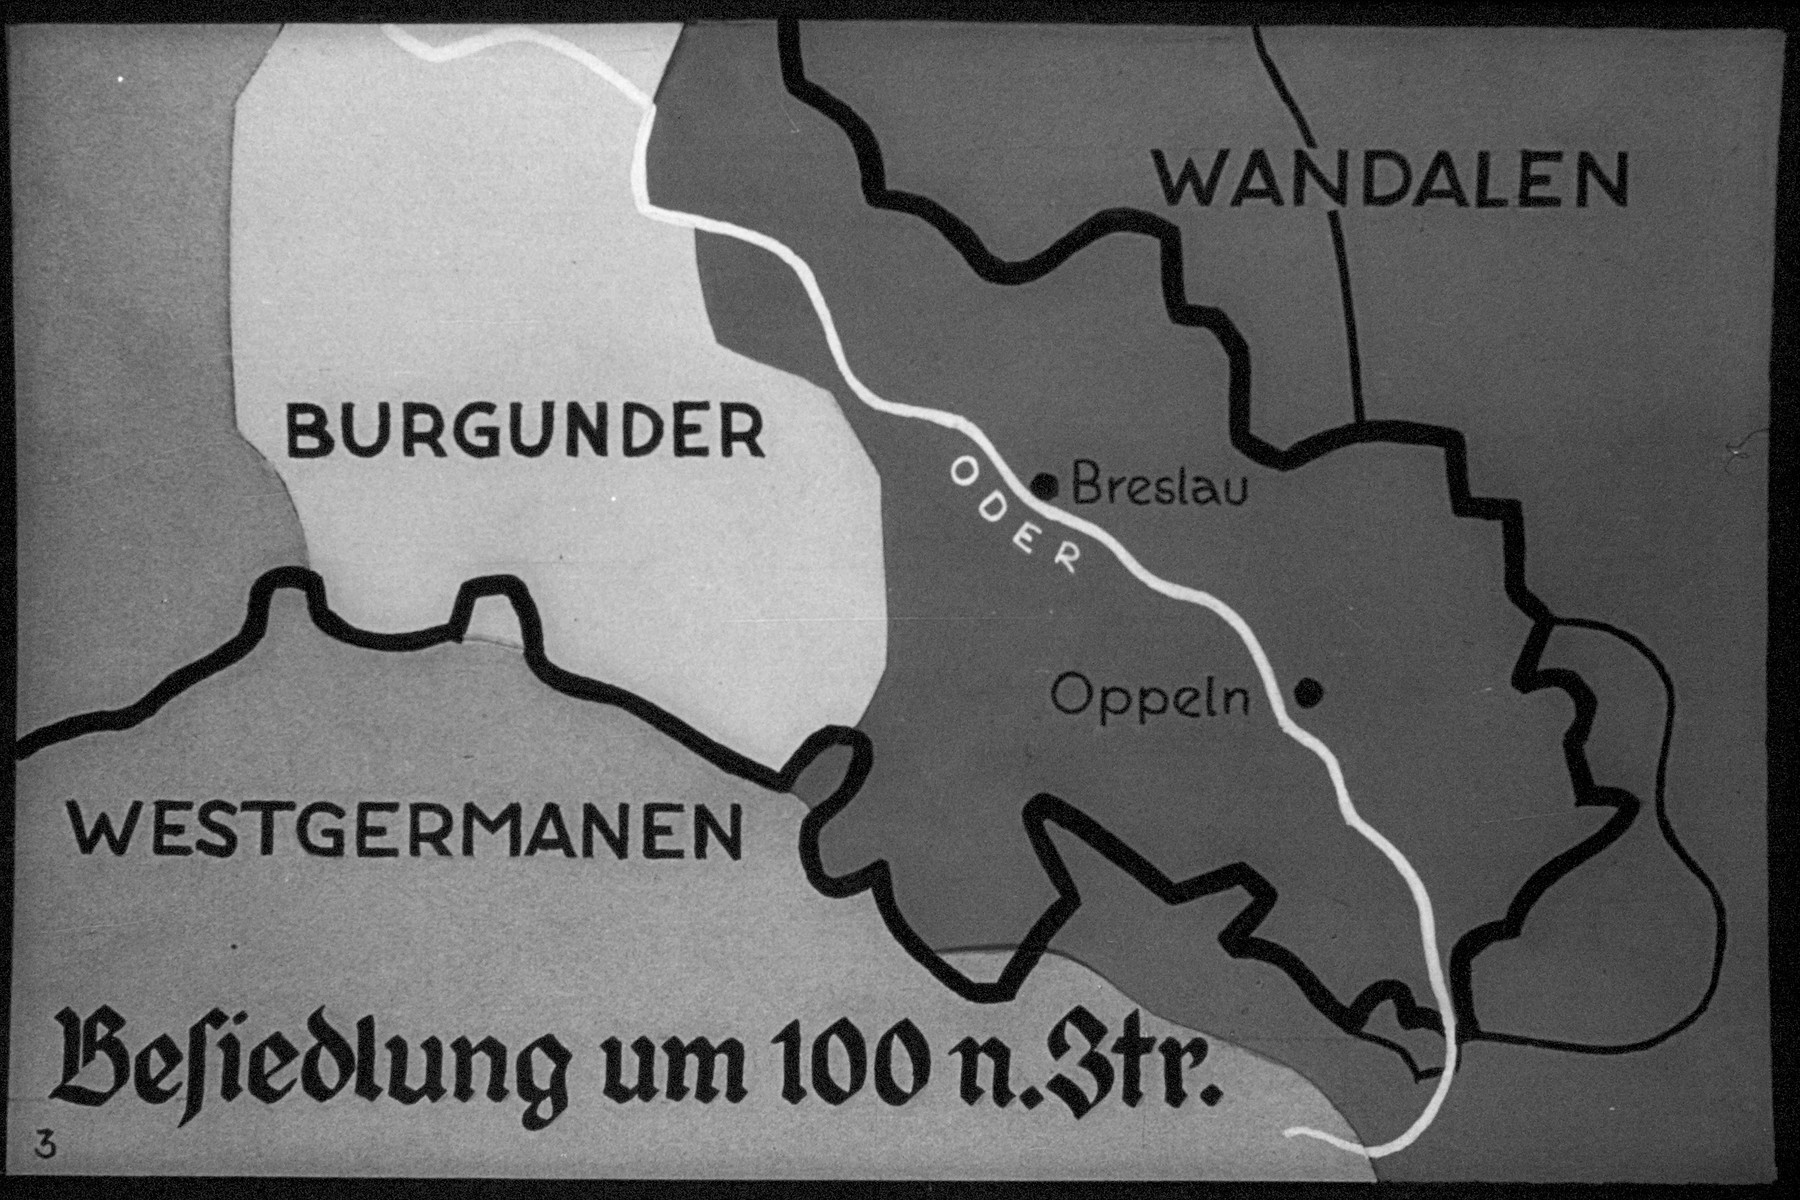 5th Nazi propaganda slide from Hitler Youth educational material titled "Border Land Upper Silesia."

Besiedlung um 100 n.Ztr.
//
Colonization by 100 n.Ztr.